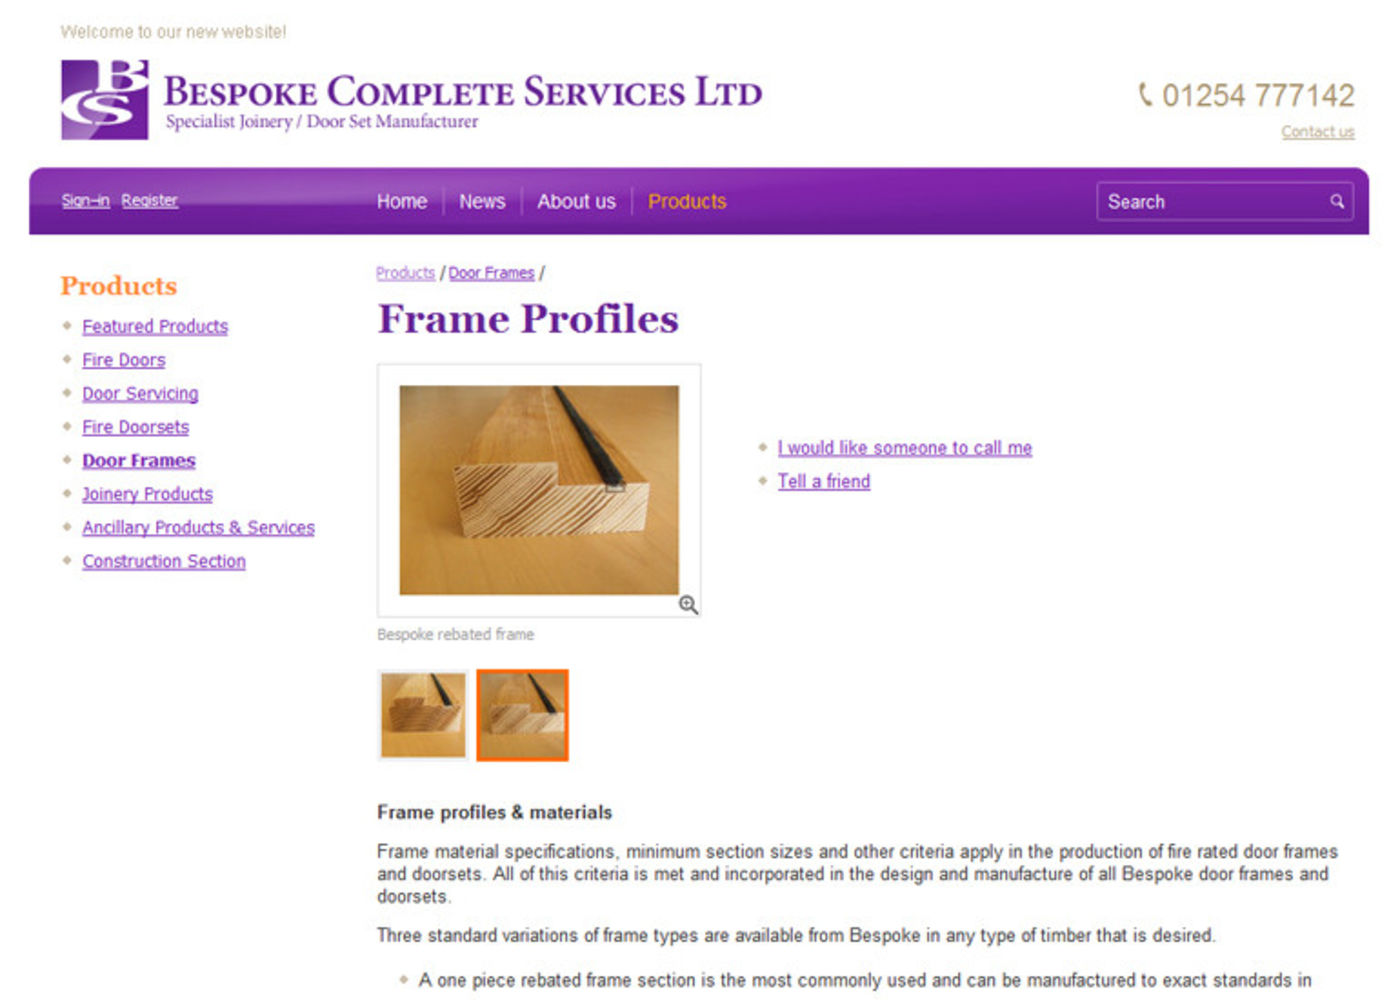 Bespoke Complete Services Ltd Product